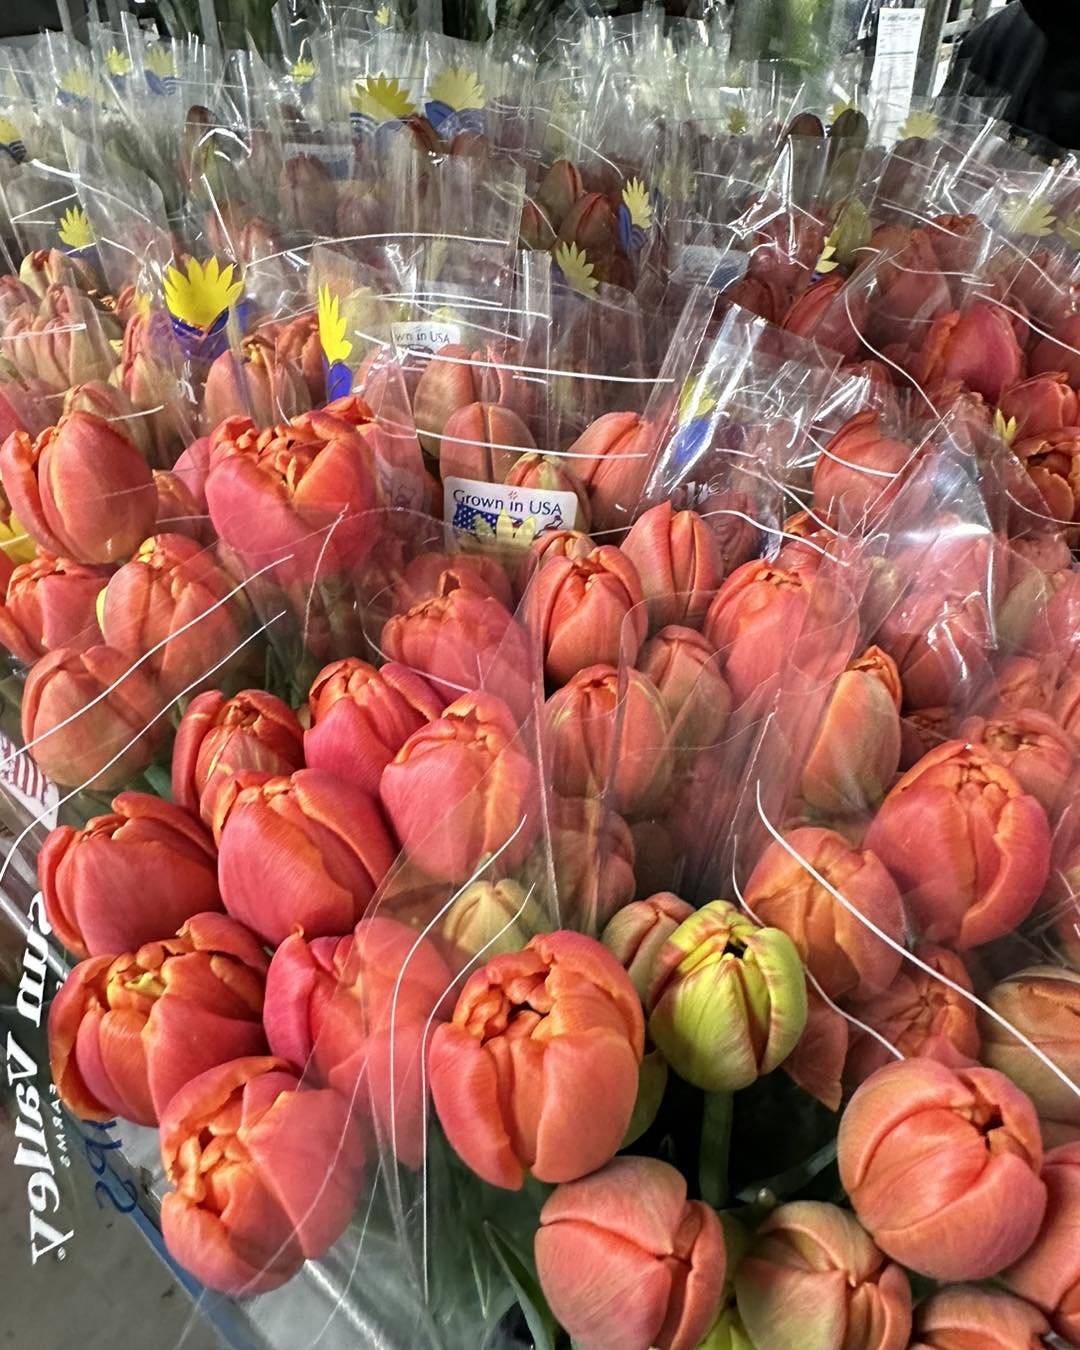 Tulips, Tulips, Tulips! 🌷 

We are getting down to the wire here for Mother&rsquo;s Day shipping so, get in touch with us if you need last minute flowers. 

#tulips #tulipsofinstagrams #tuliplovers #SunValleyfloralfarms #mothersday